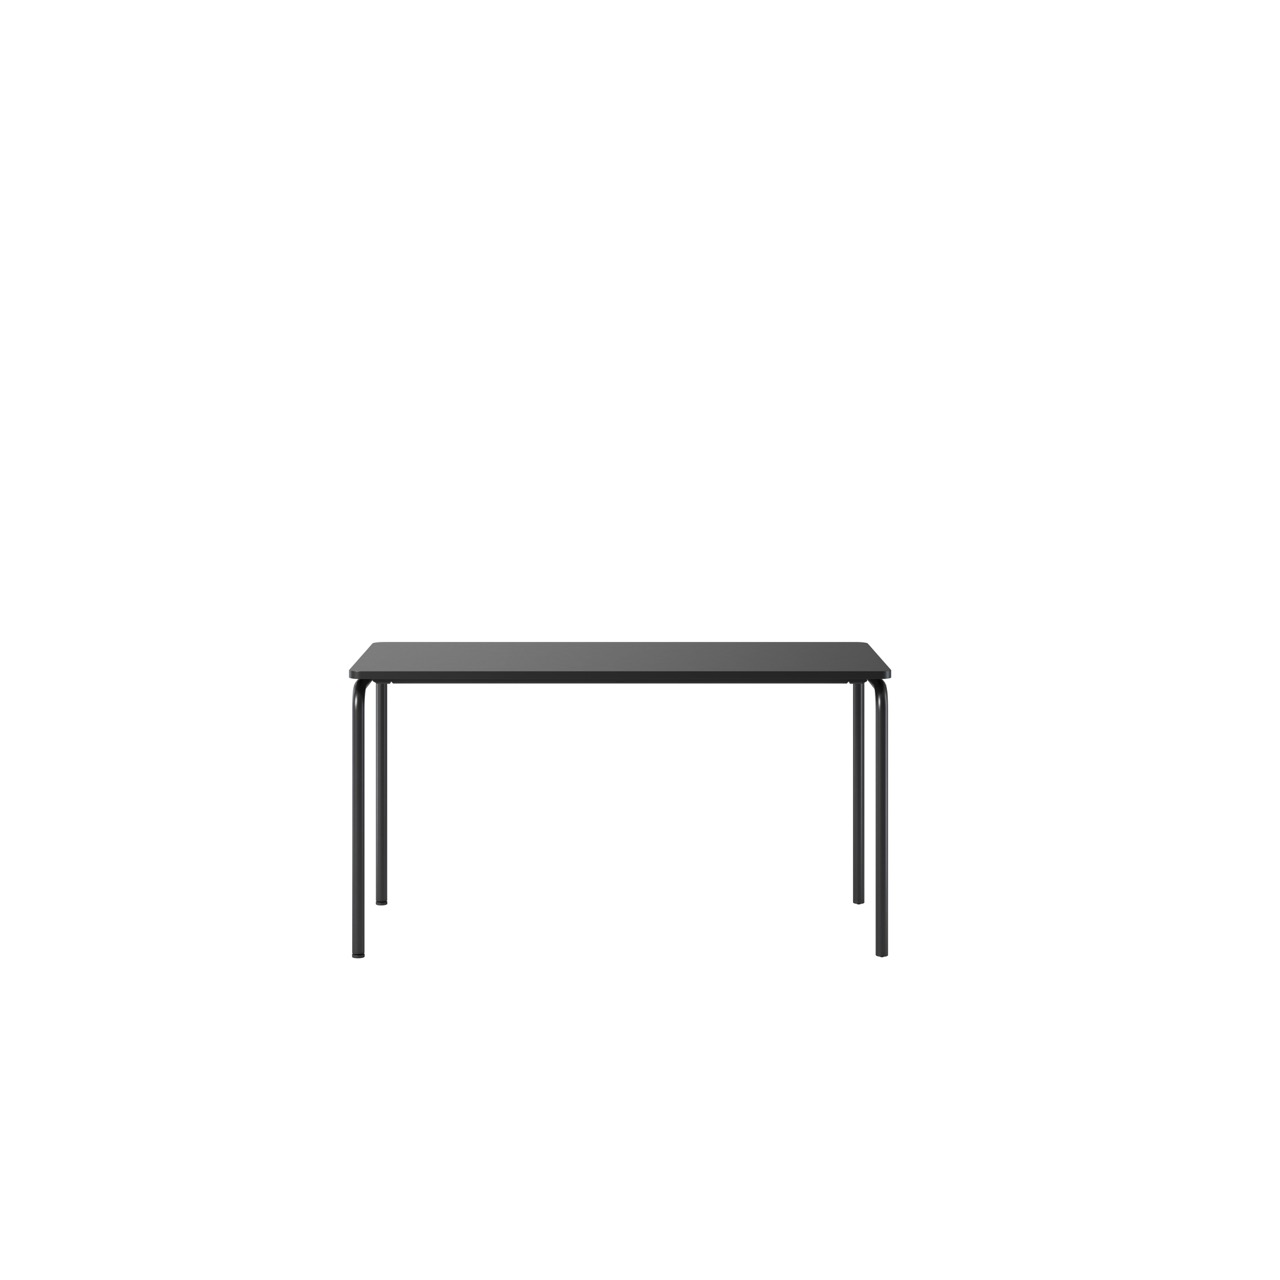 OCEE&FOUR - Tables - FourReal 74 - 140 x 70 - Straight - Packshot Image 3 Large